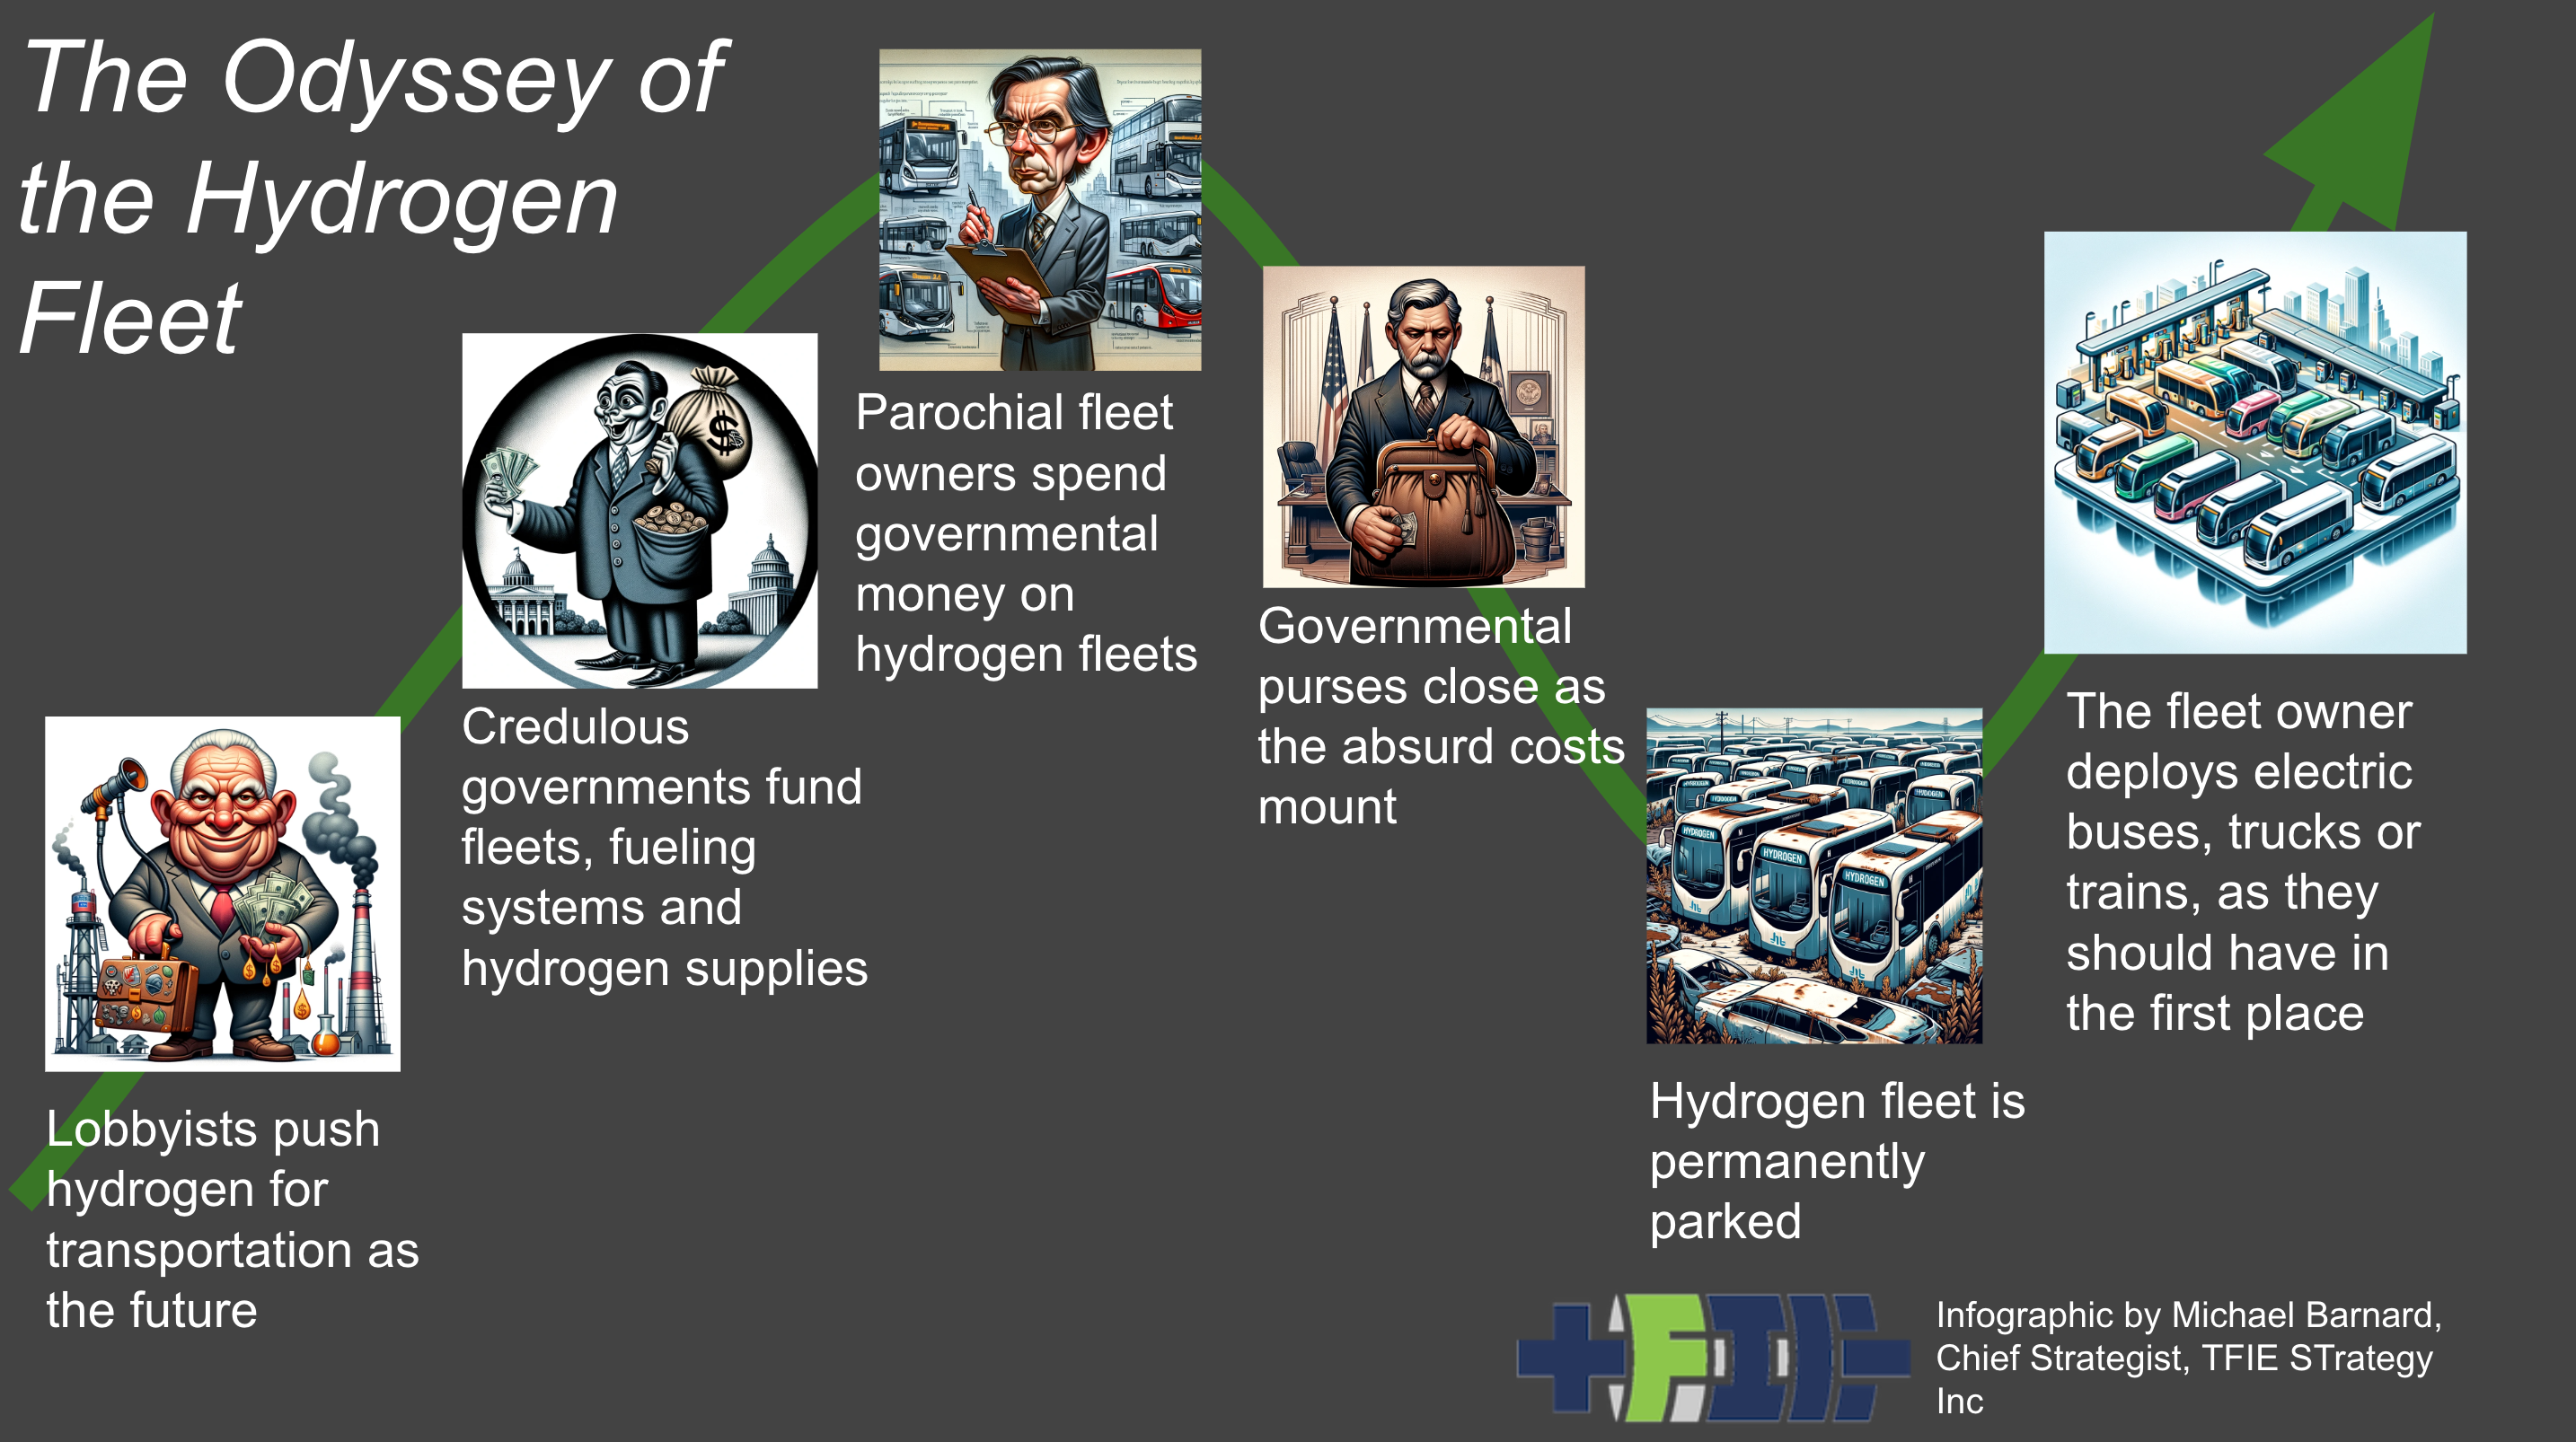 Odyssey of the Hydrogen Fleet infographic by Michael Barnard, Chief Strategist, TFIE Strategy Inc, icons by ChatGPT & DALL-E